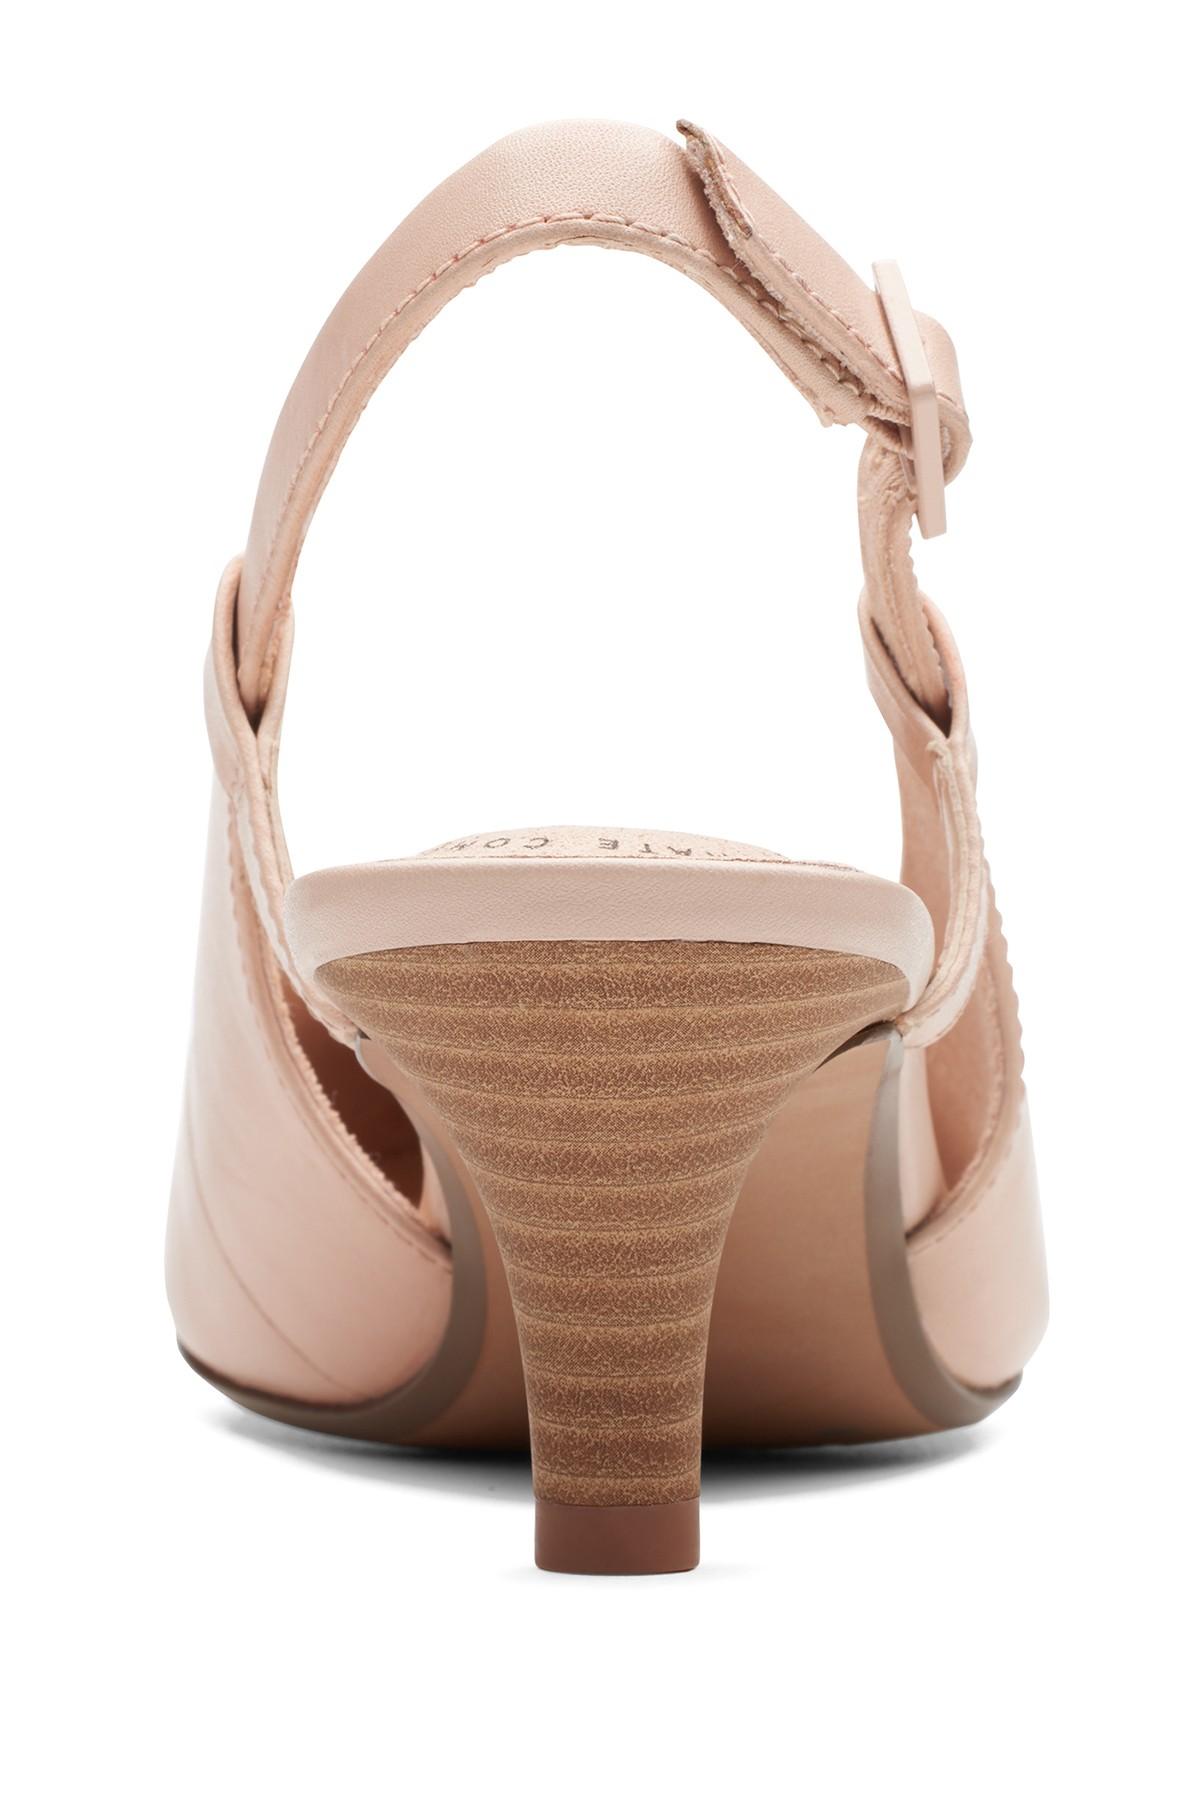 Clarks Leather Linvale Loop Womens Slingback Shoes in Blush Leather (Pink)  - Lyst